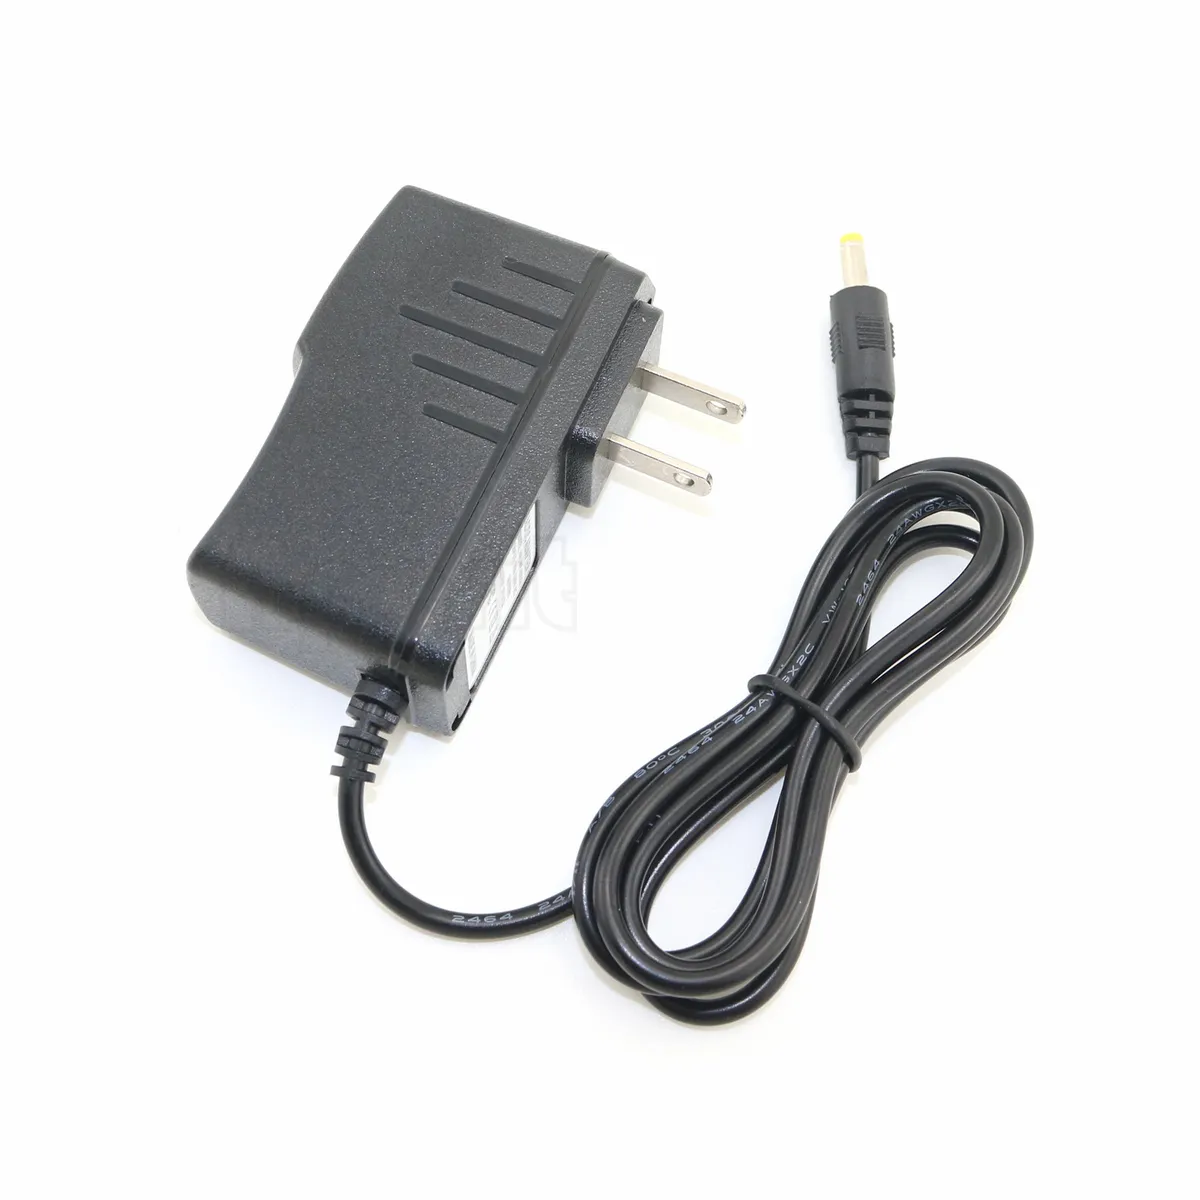 AC Adapter Power Cord for Omron 5 7 10 Series Blood Pressure Monitor HEM-ADPTW5